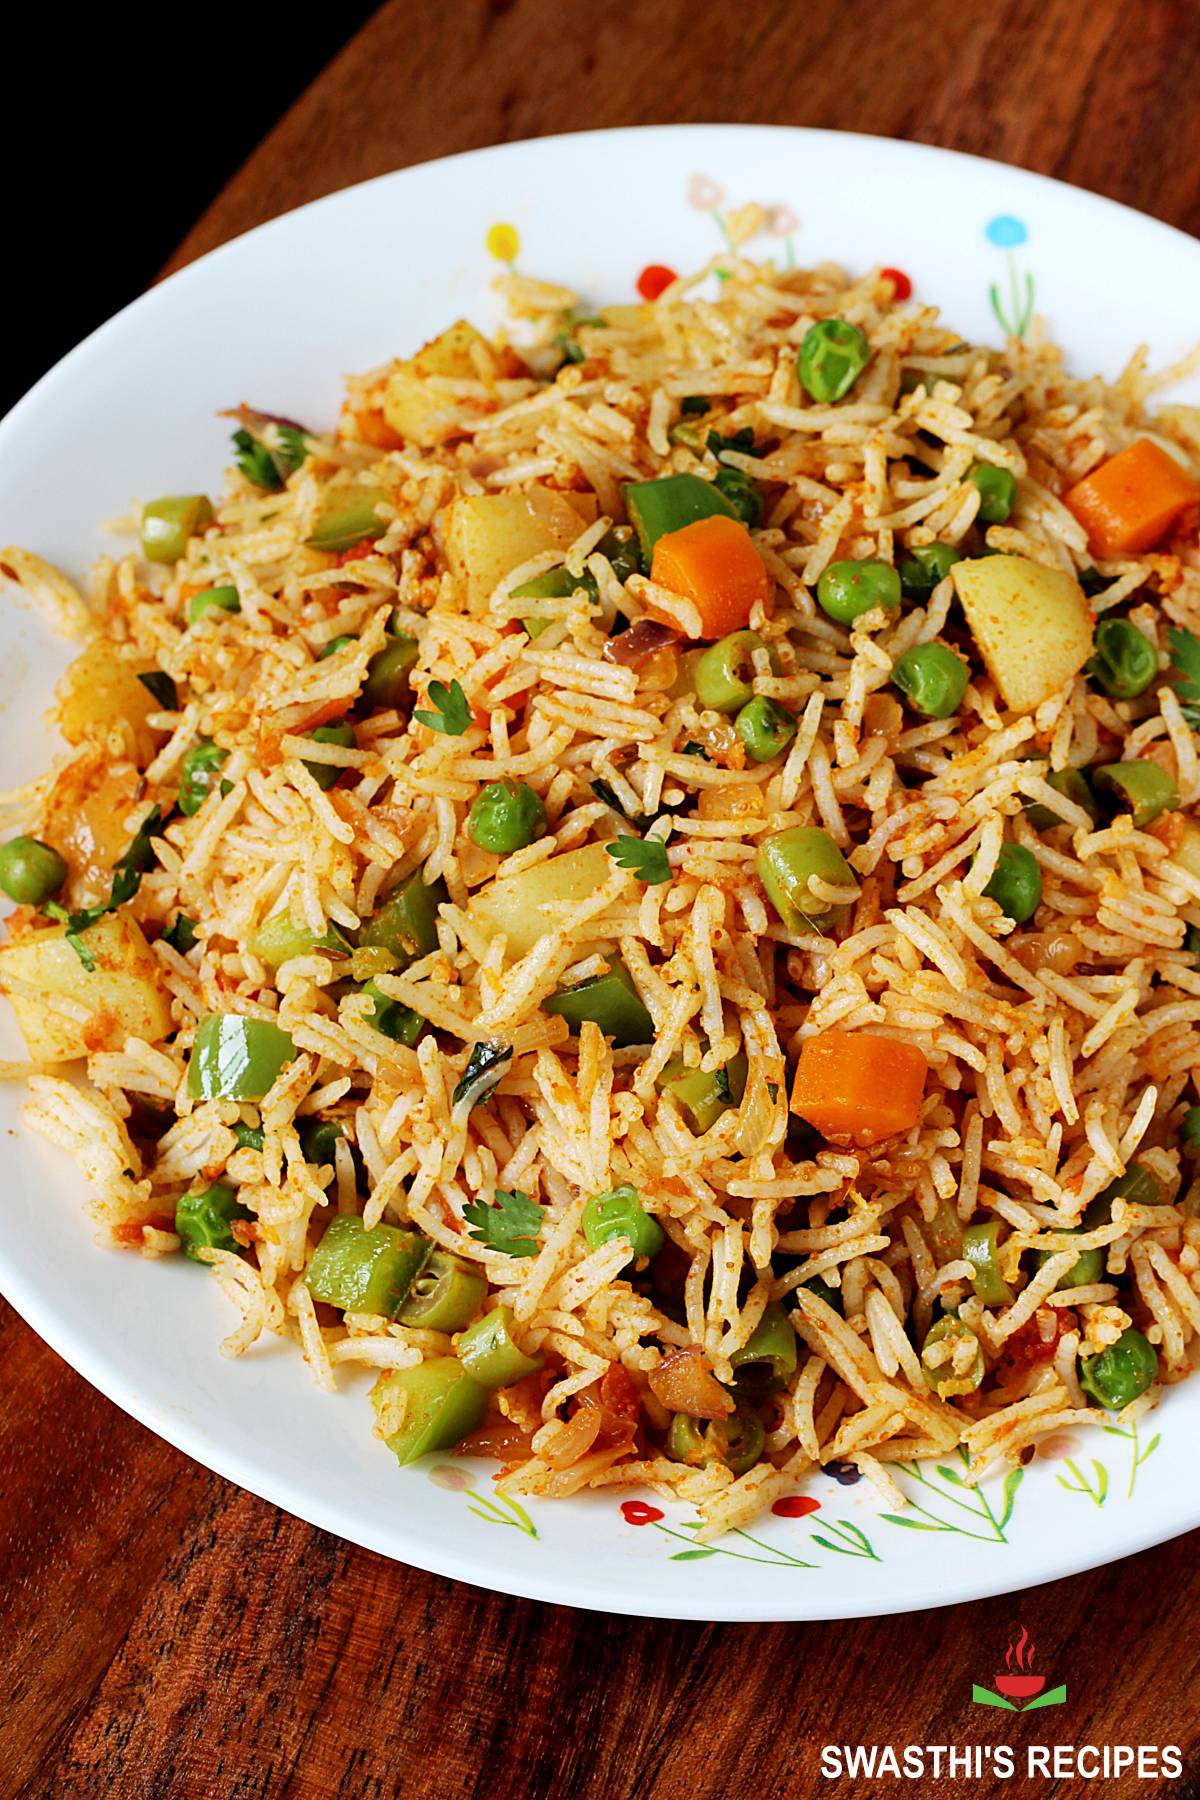 tawa pulao made with rice, vegetables and spices